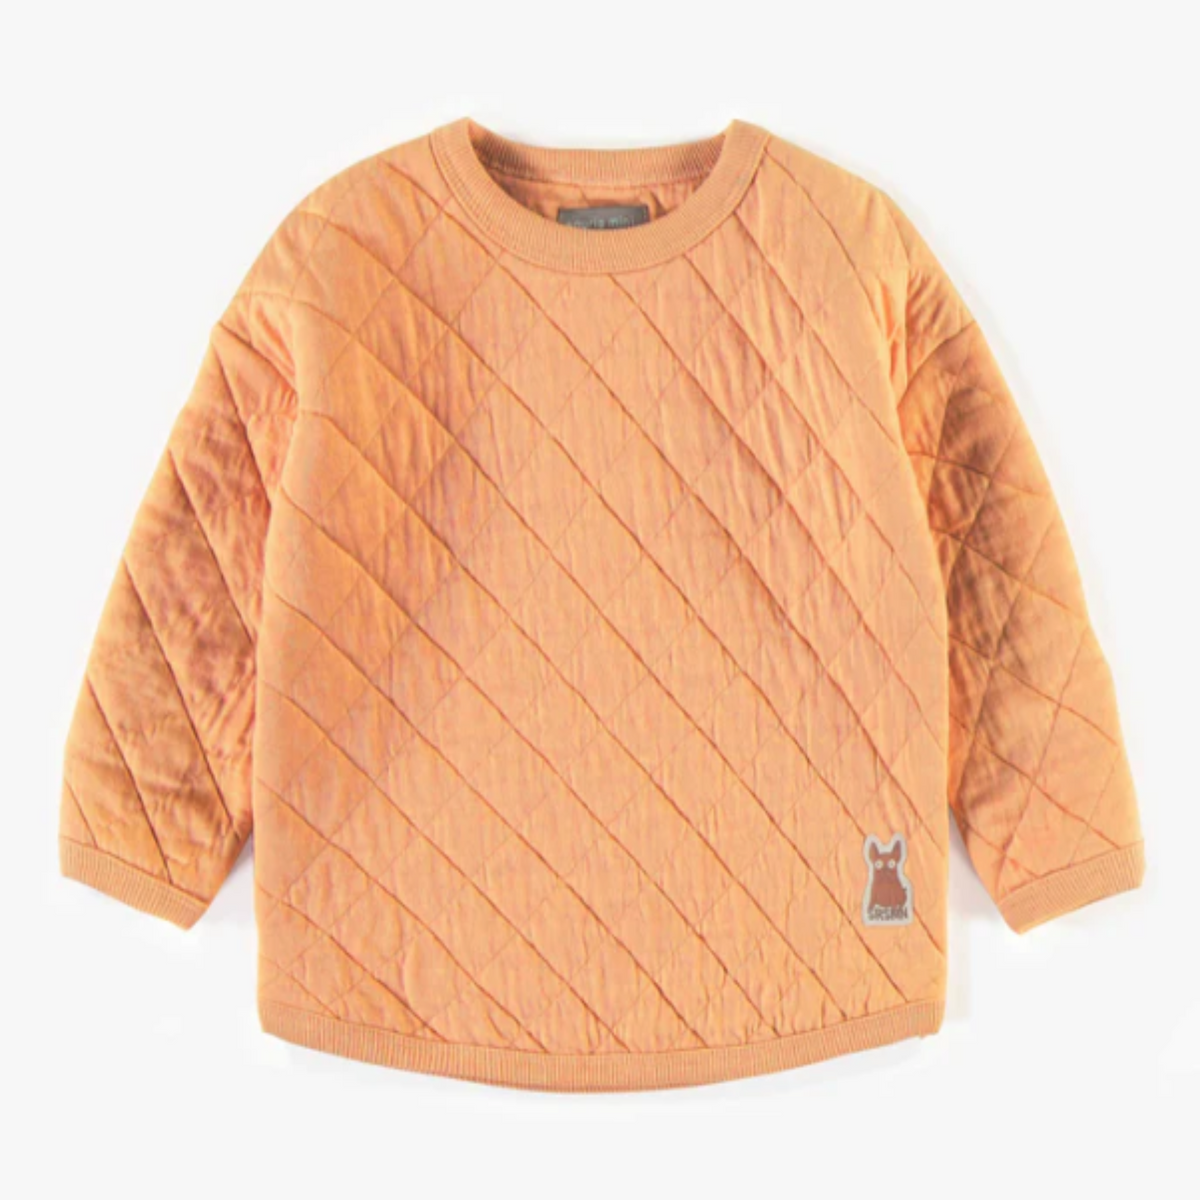 Orange sweater in quilted jersey